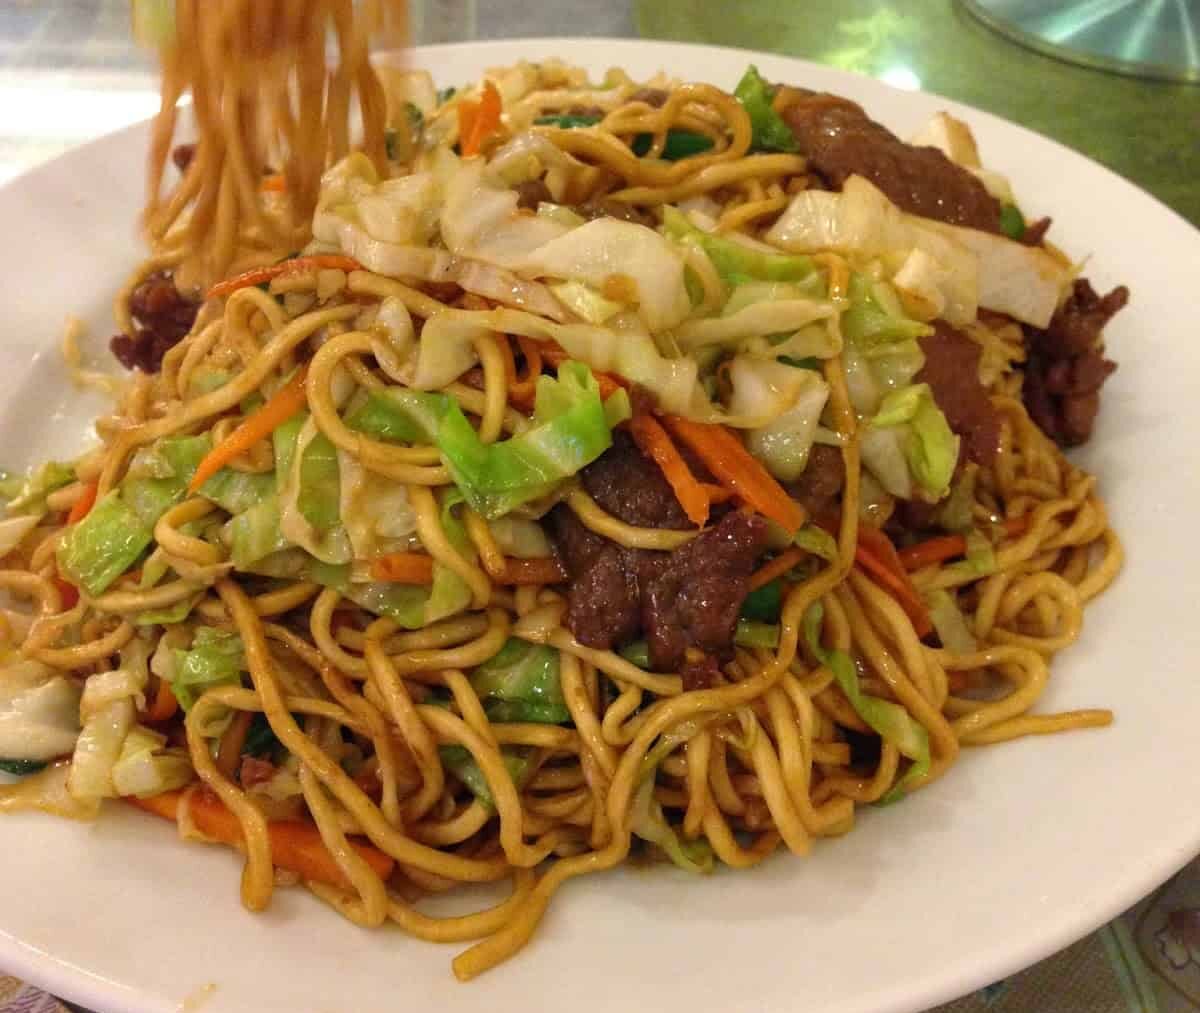 Noodles with beef and vegetables at Casas Campeão